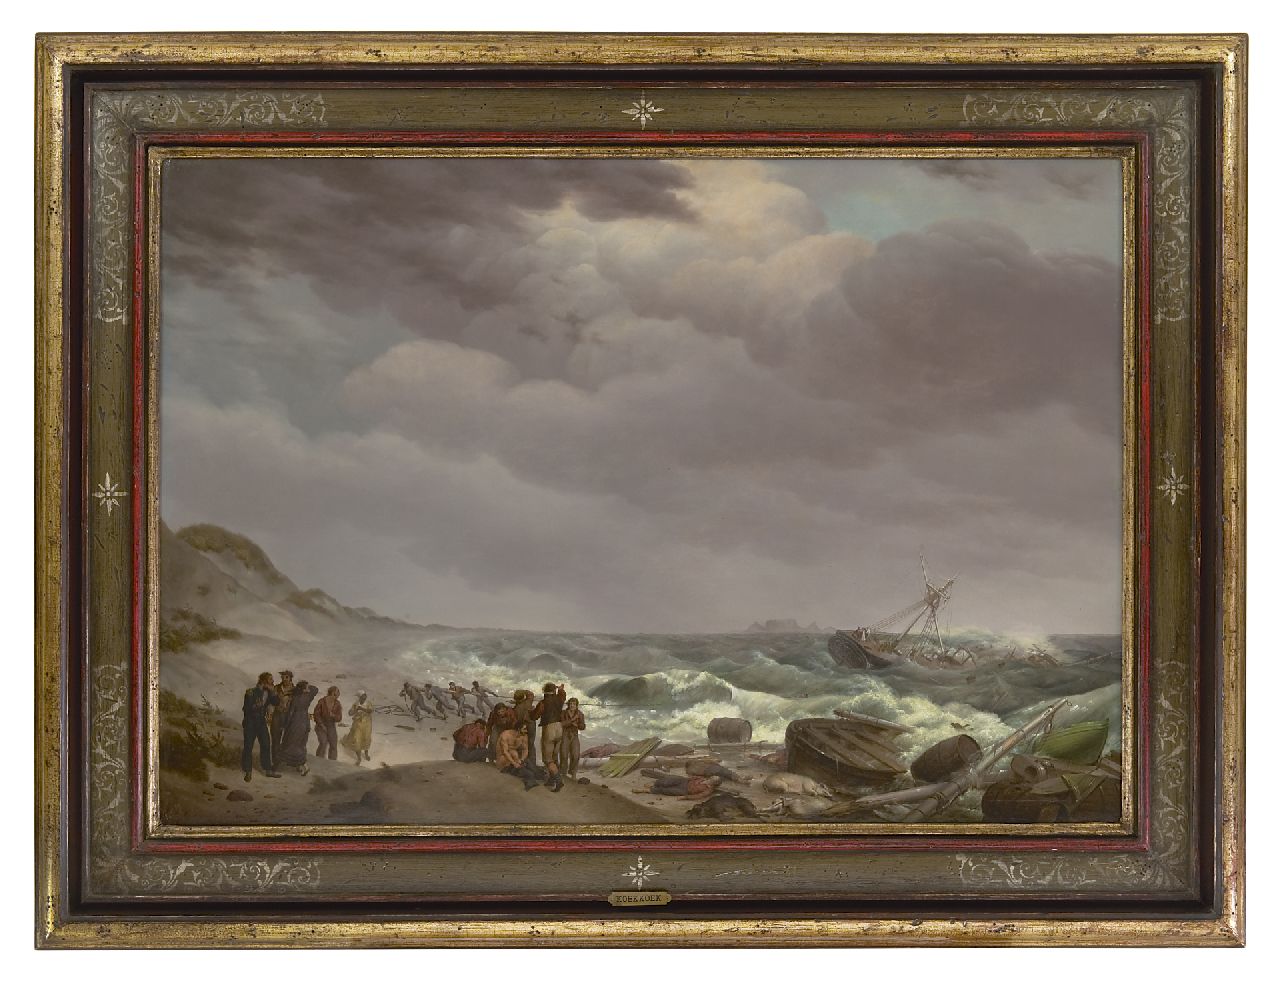 Koekkoek J.H.  | Johannes Hermanus Koekkoek | Paintings offered for sale | Shipwreck at the Cape Colony, South-Africa, with the Table Mountain in the distance, oil on panel 57.4 x 82.8 cm, signed l.r. and dated 1824 (vague)